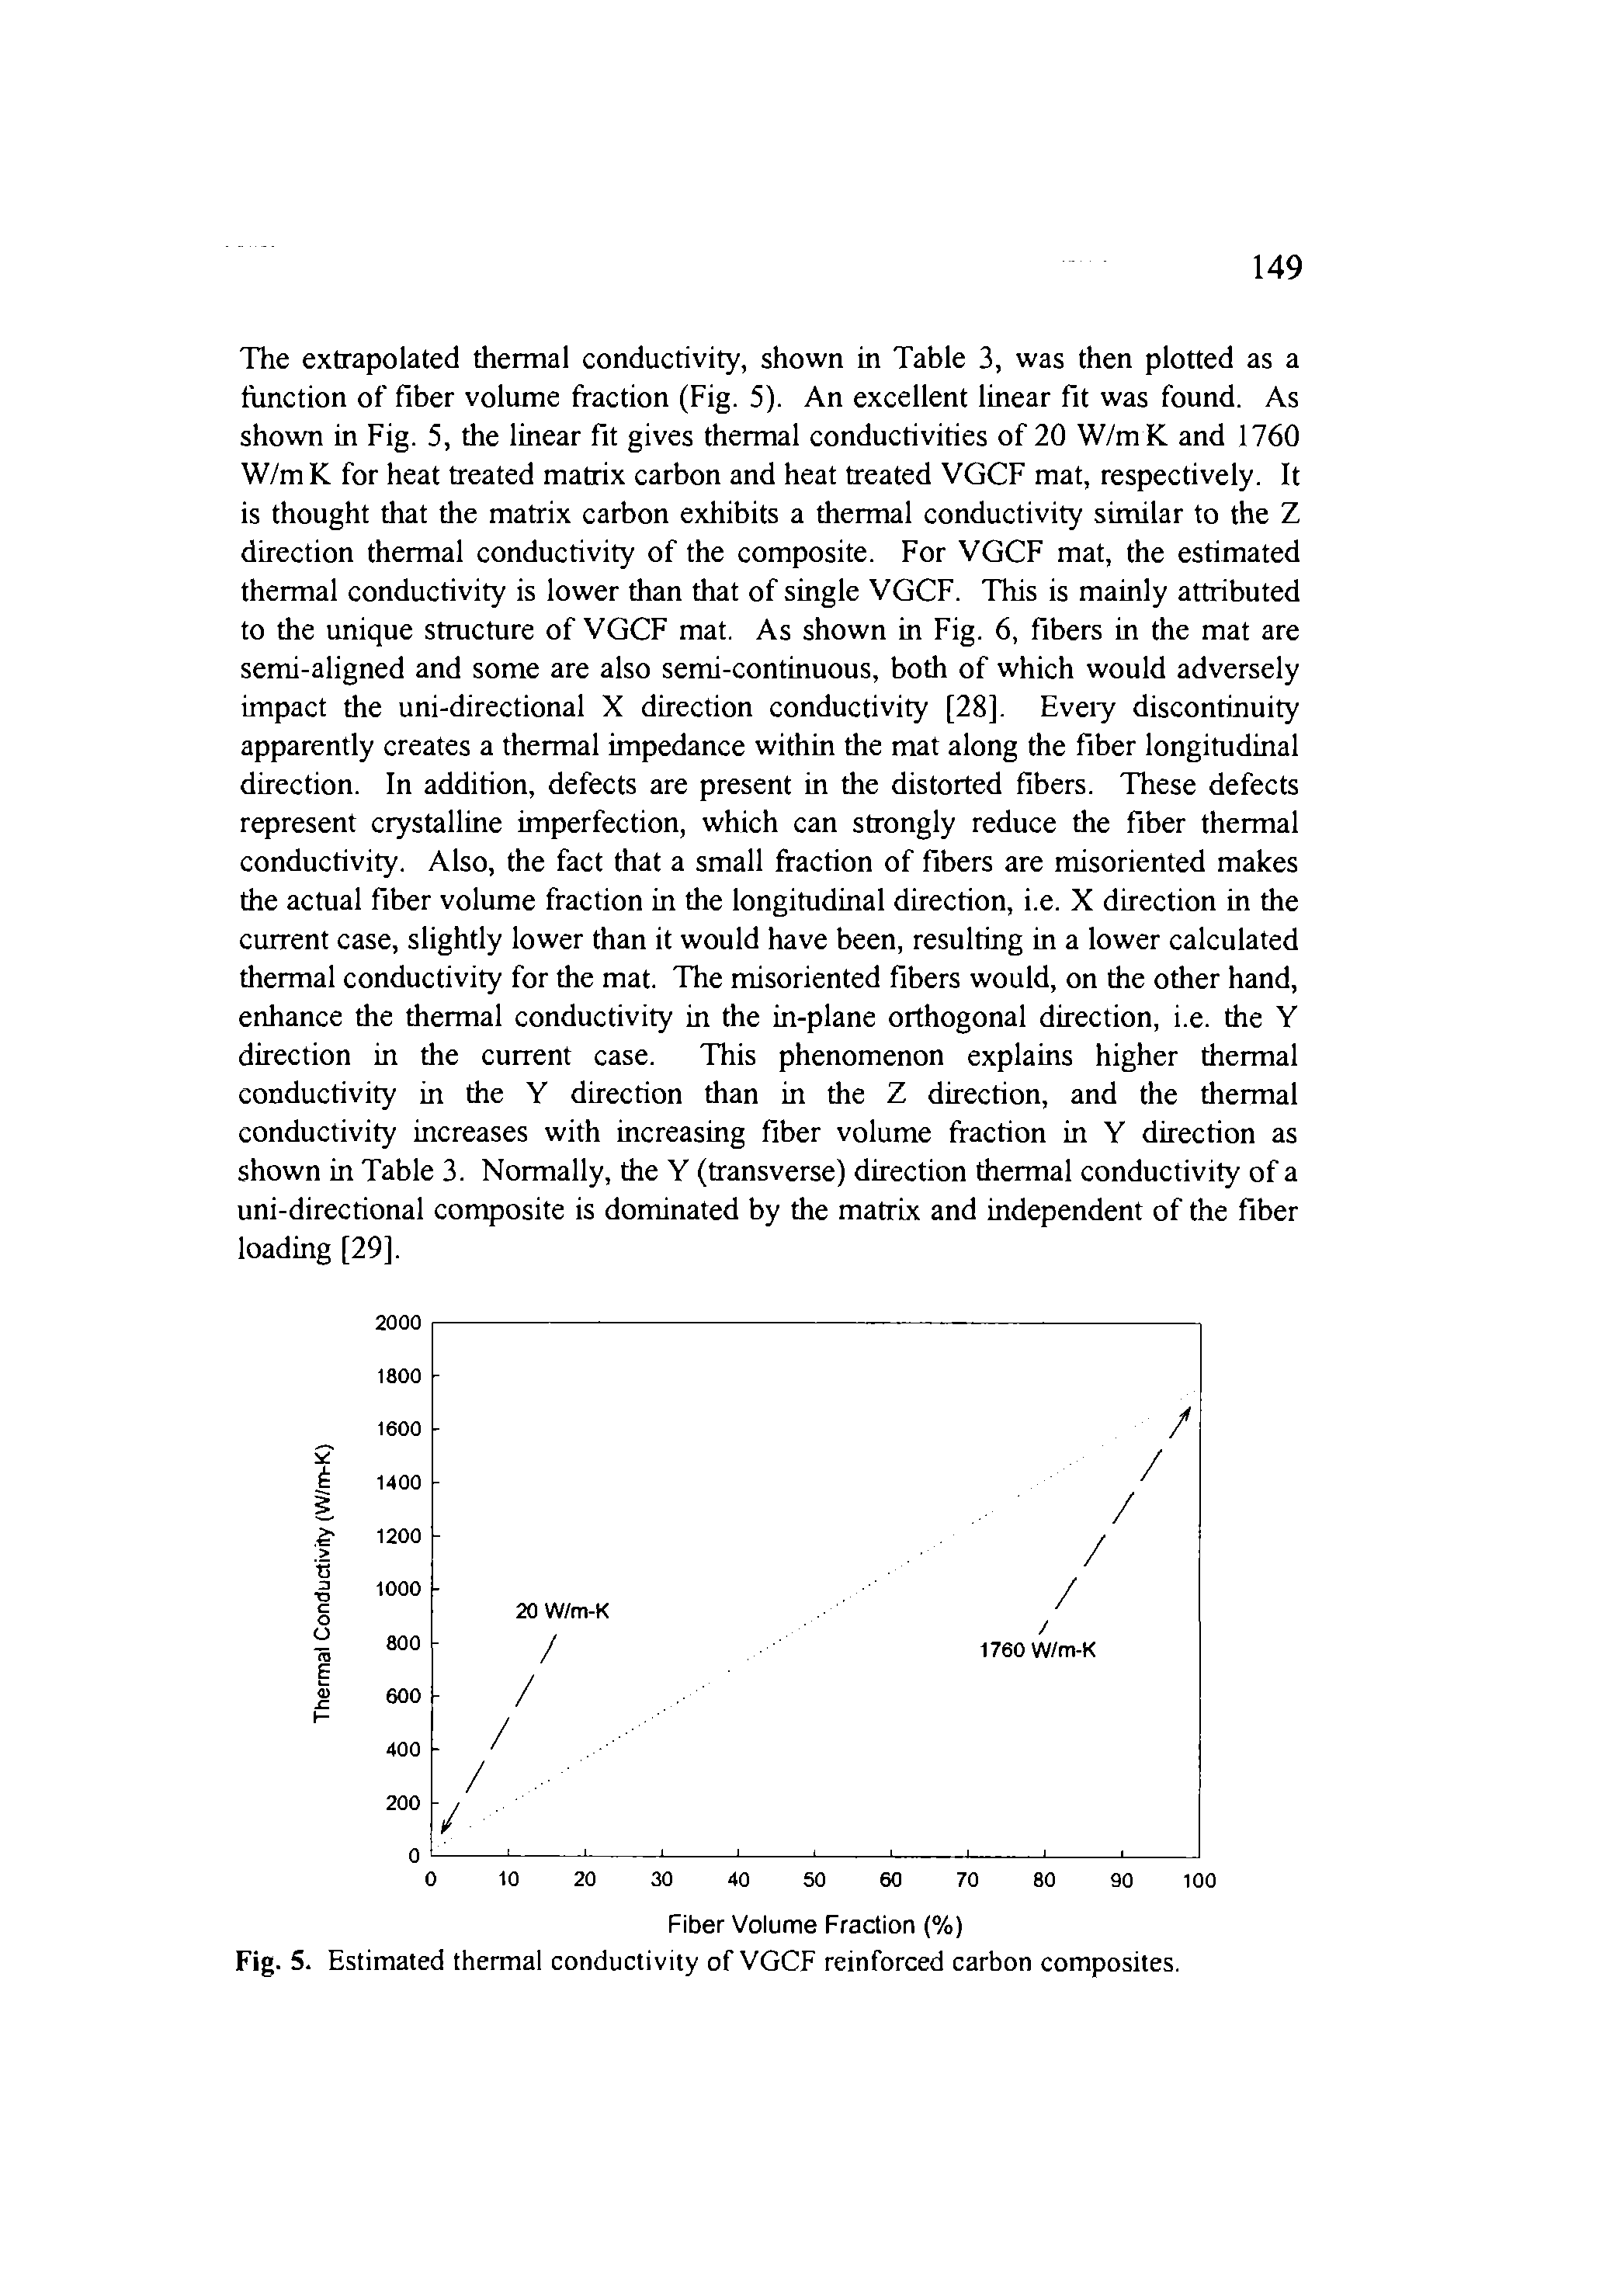 Fig. 5. Estimated thermal conductivity of VGCF reinforced carbon composites.